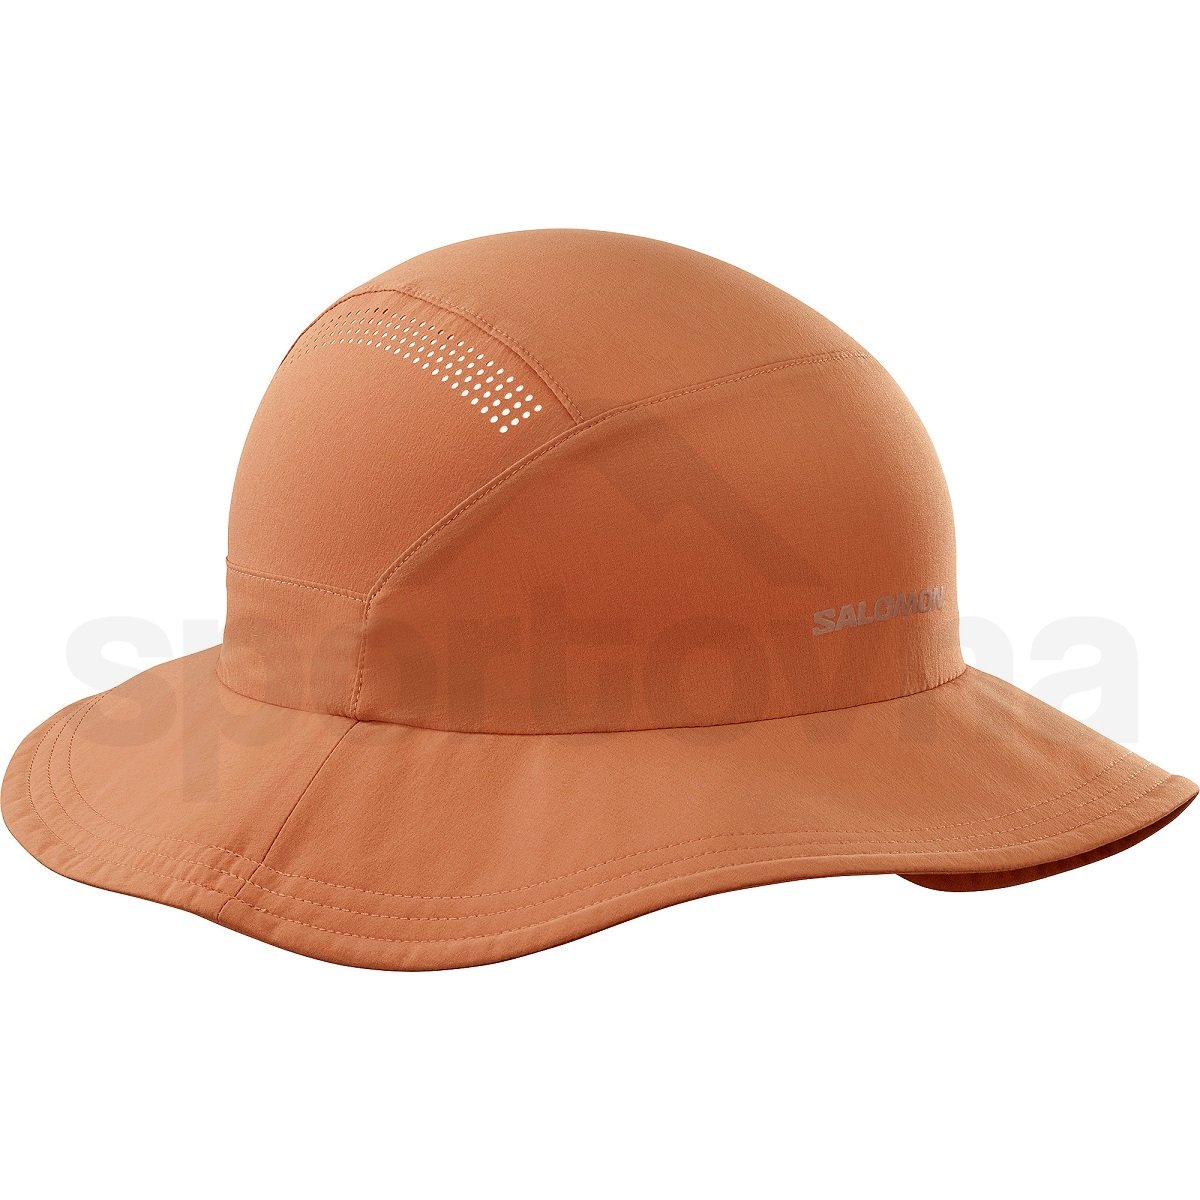 LC2237700_0_GHO_mountainhat_bakedclay_headwear_u.png.high-res